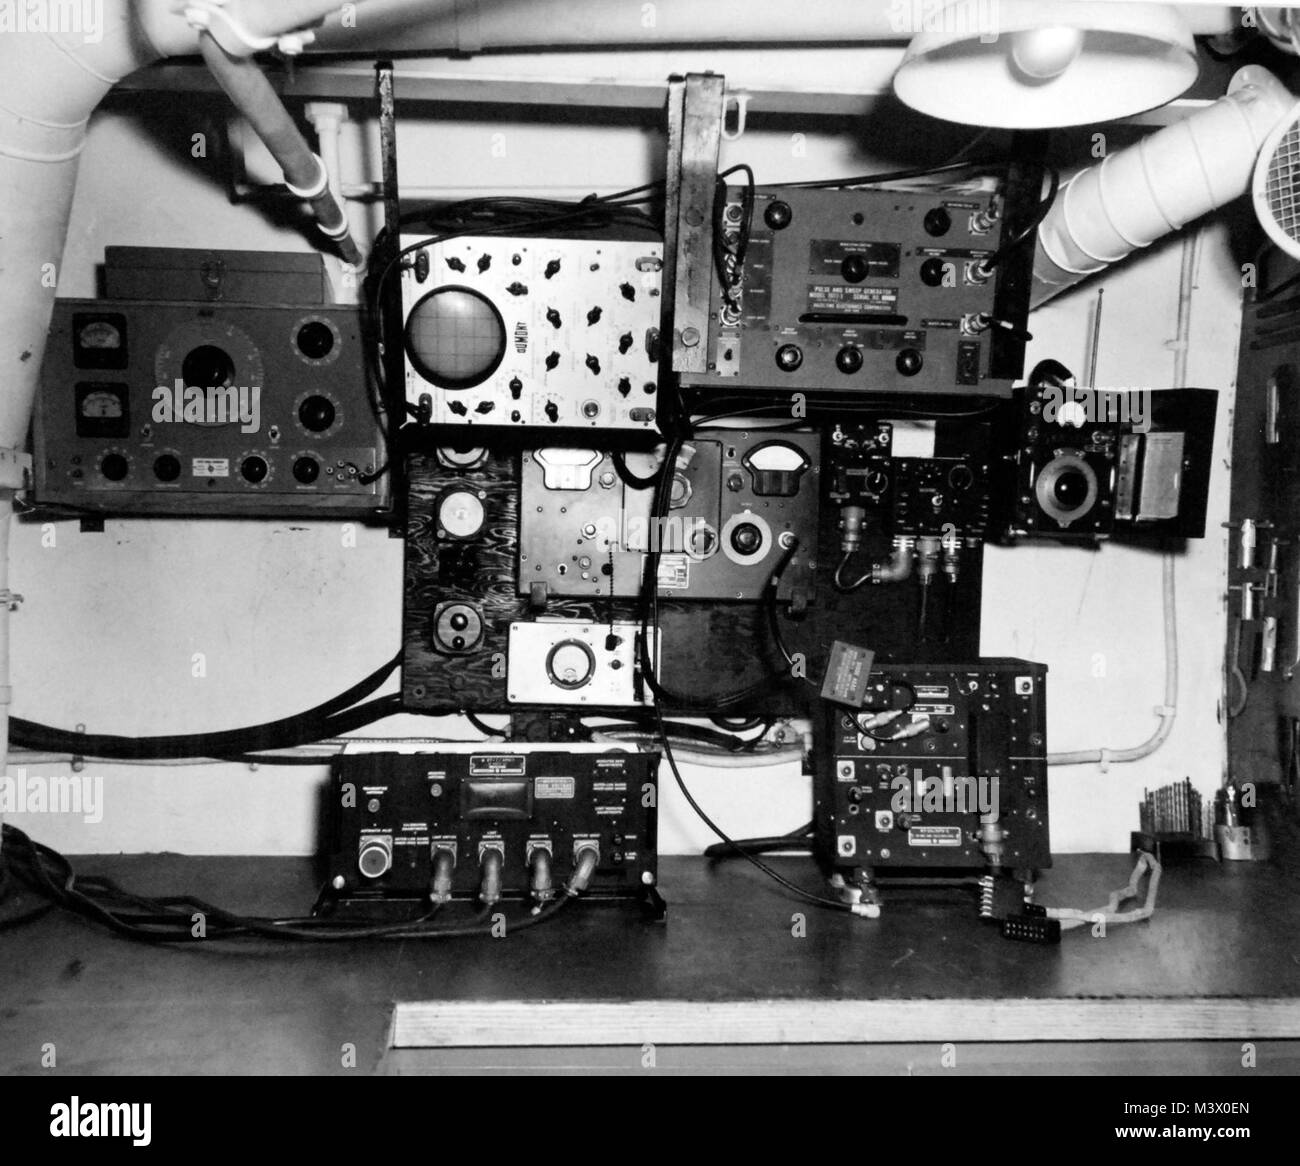 80-G-366351:  USS Card (CVE-11), May 25, 1945.  Equipment held in radar room.    Official U.S. Navy Photograph, now in the collections of the National Archives.  (2018/01/31). 80-G-366351 26136283138 o Stock Photo